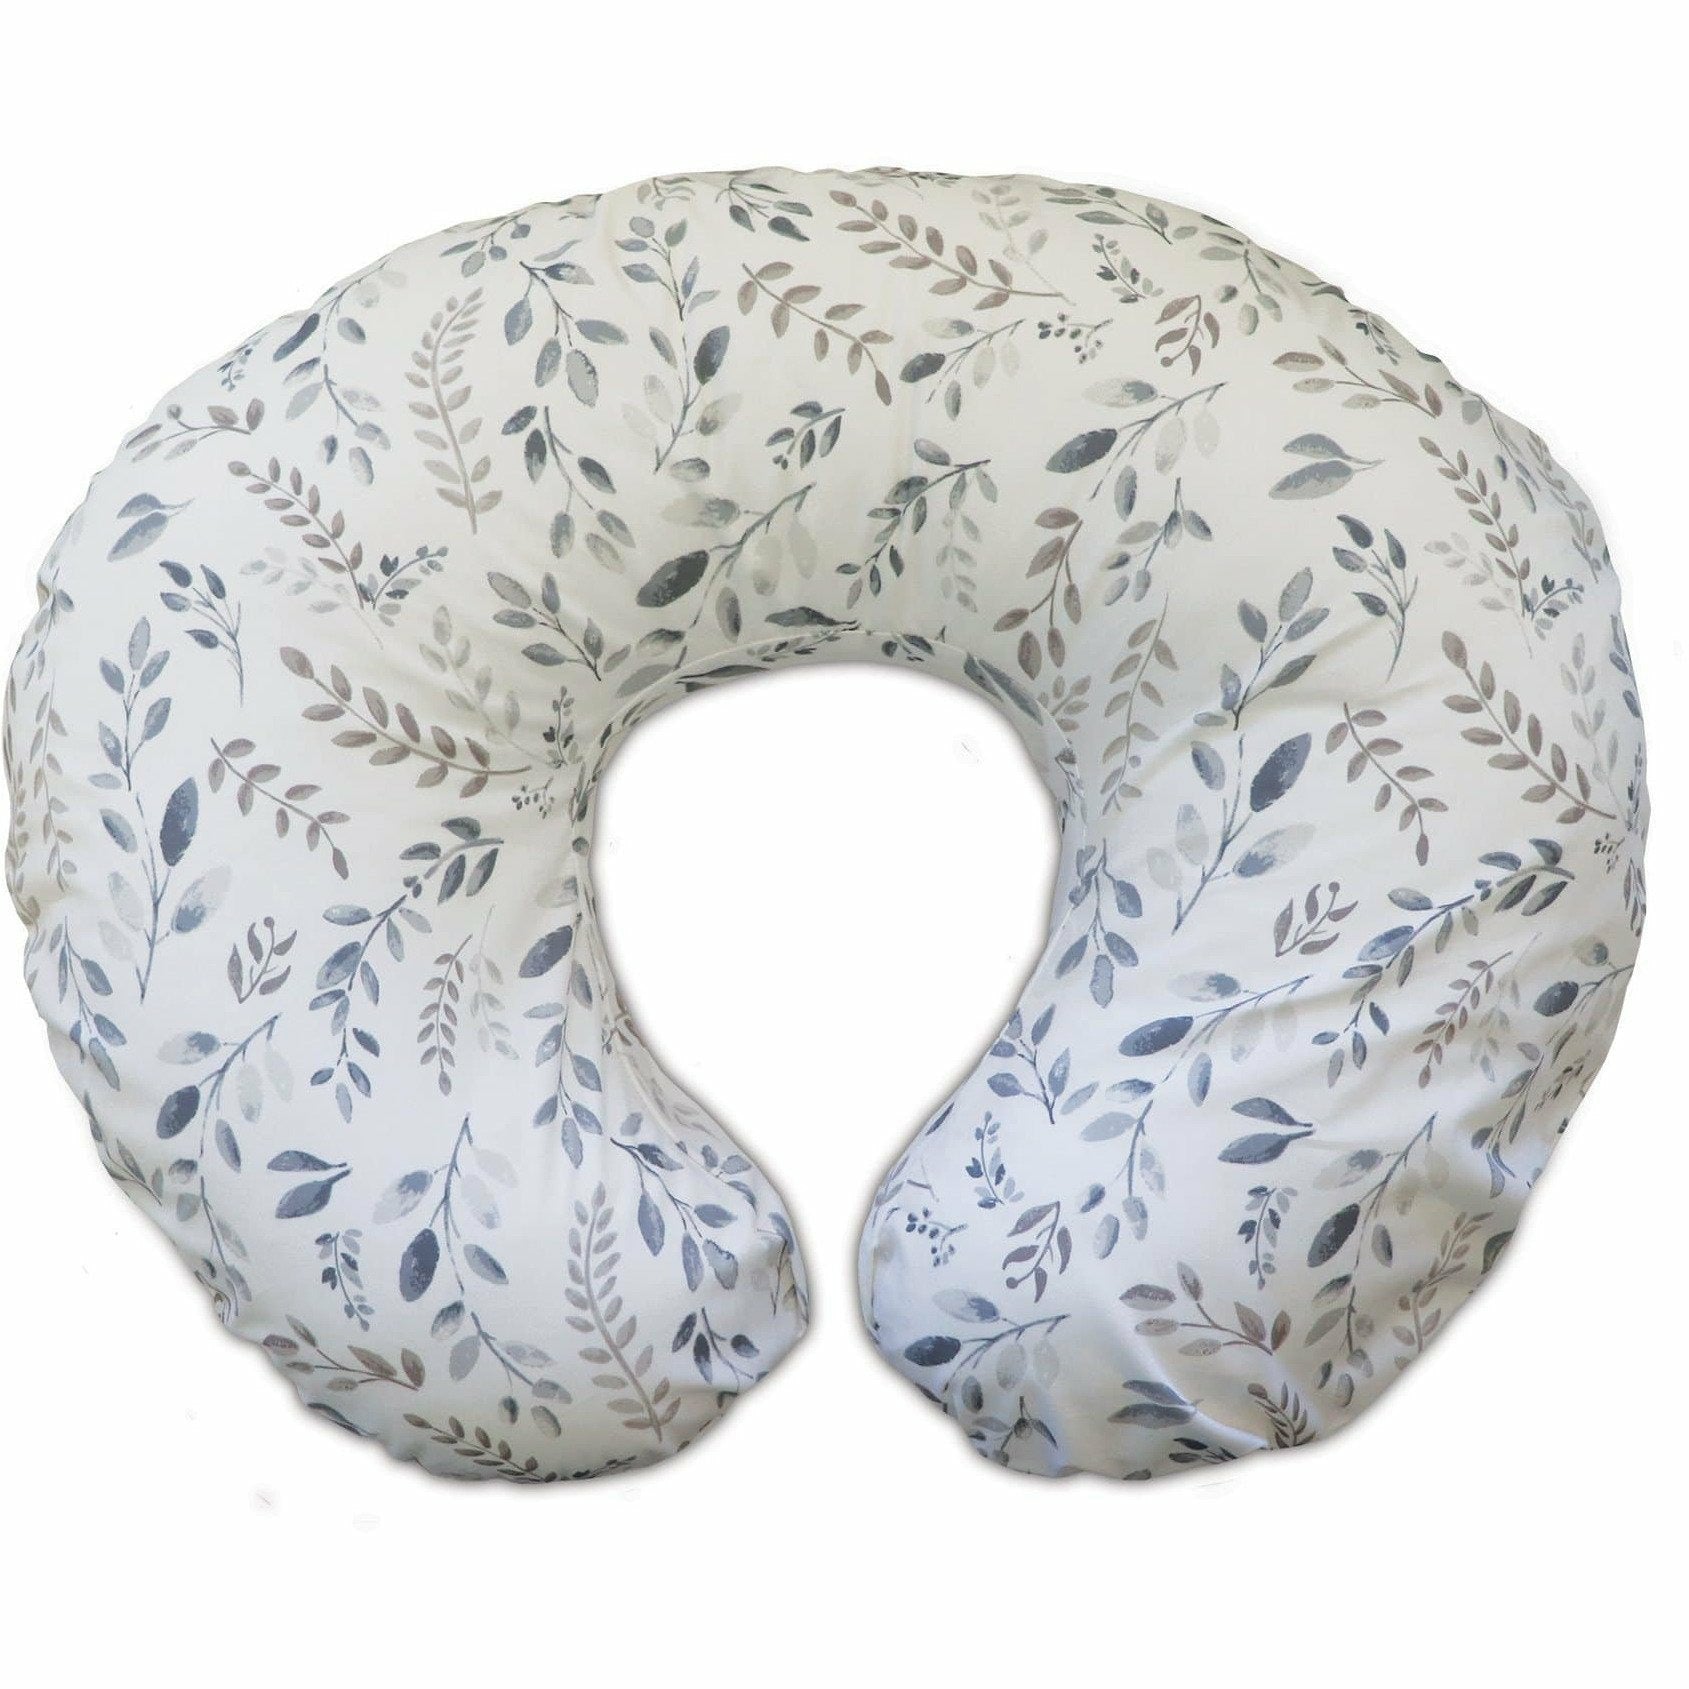 Boppy Original Feeding and Infant Support Pillow, Gray/Taupe Leaves